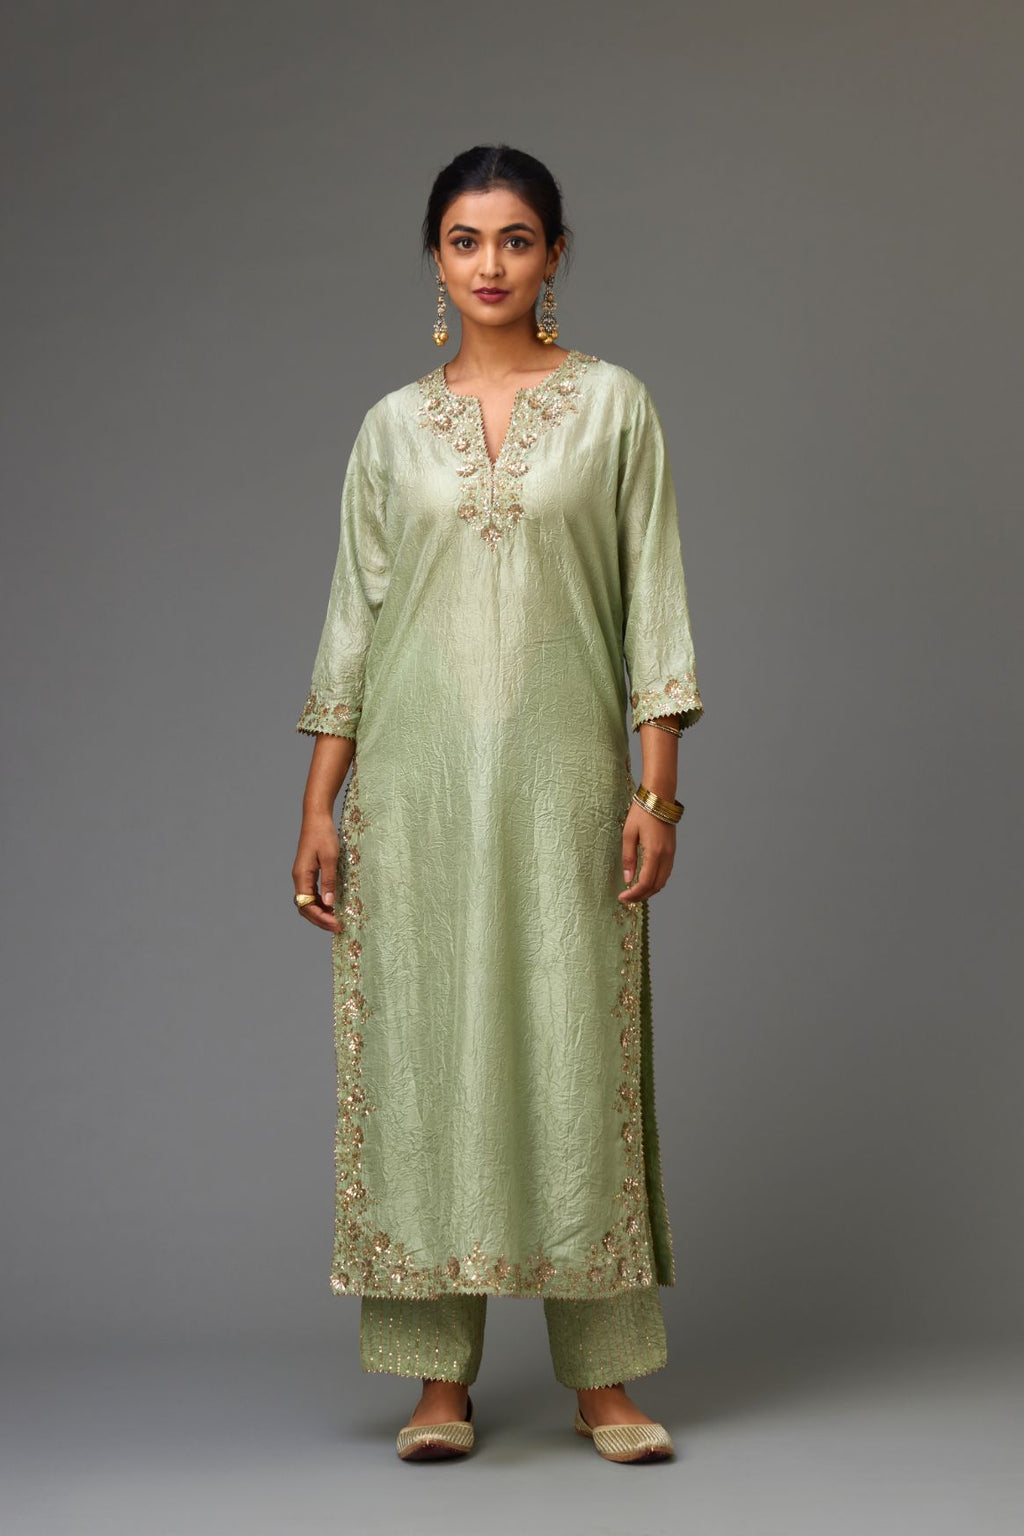 Green hand crushed silk straight kurta set highlighted with gold sequins and zari handwork.